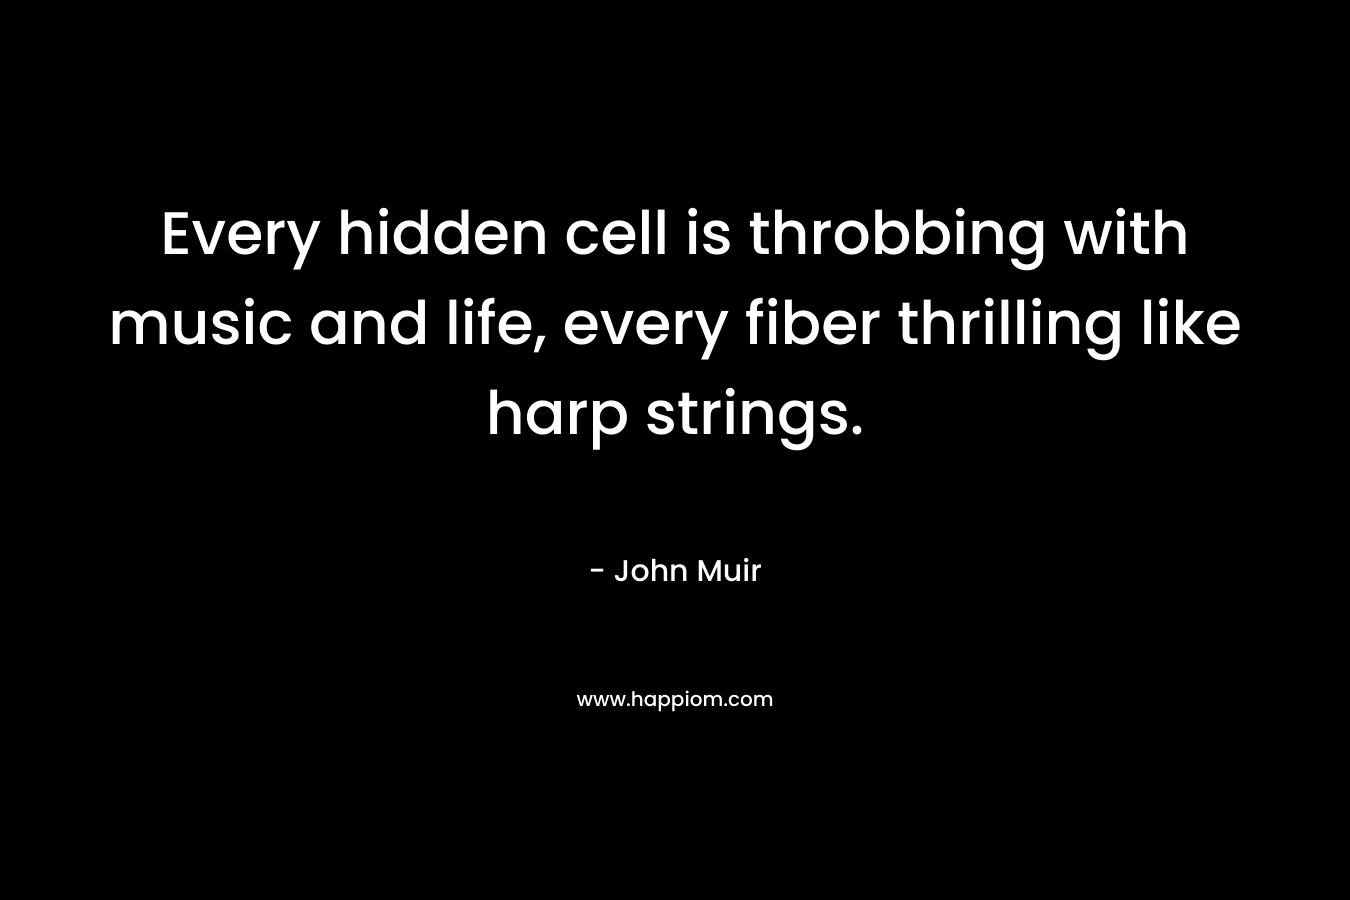 Every hidden cell is throbbing with music and life, every fiber thrilling like harp strings. – John Muir